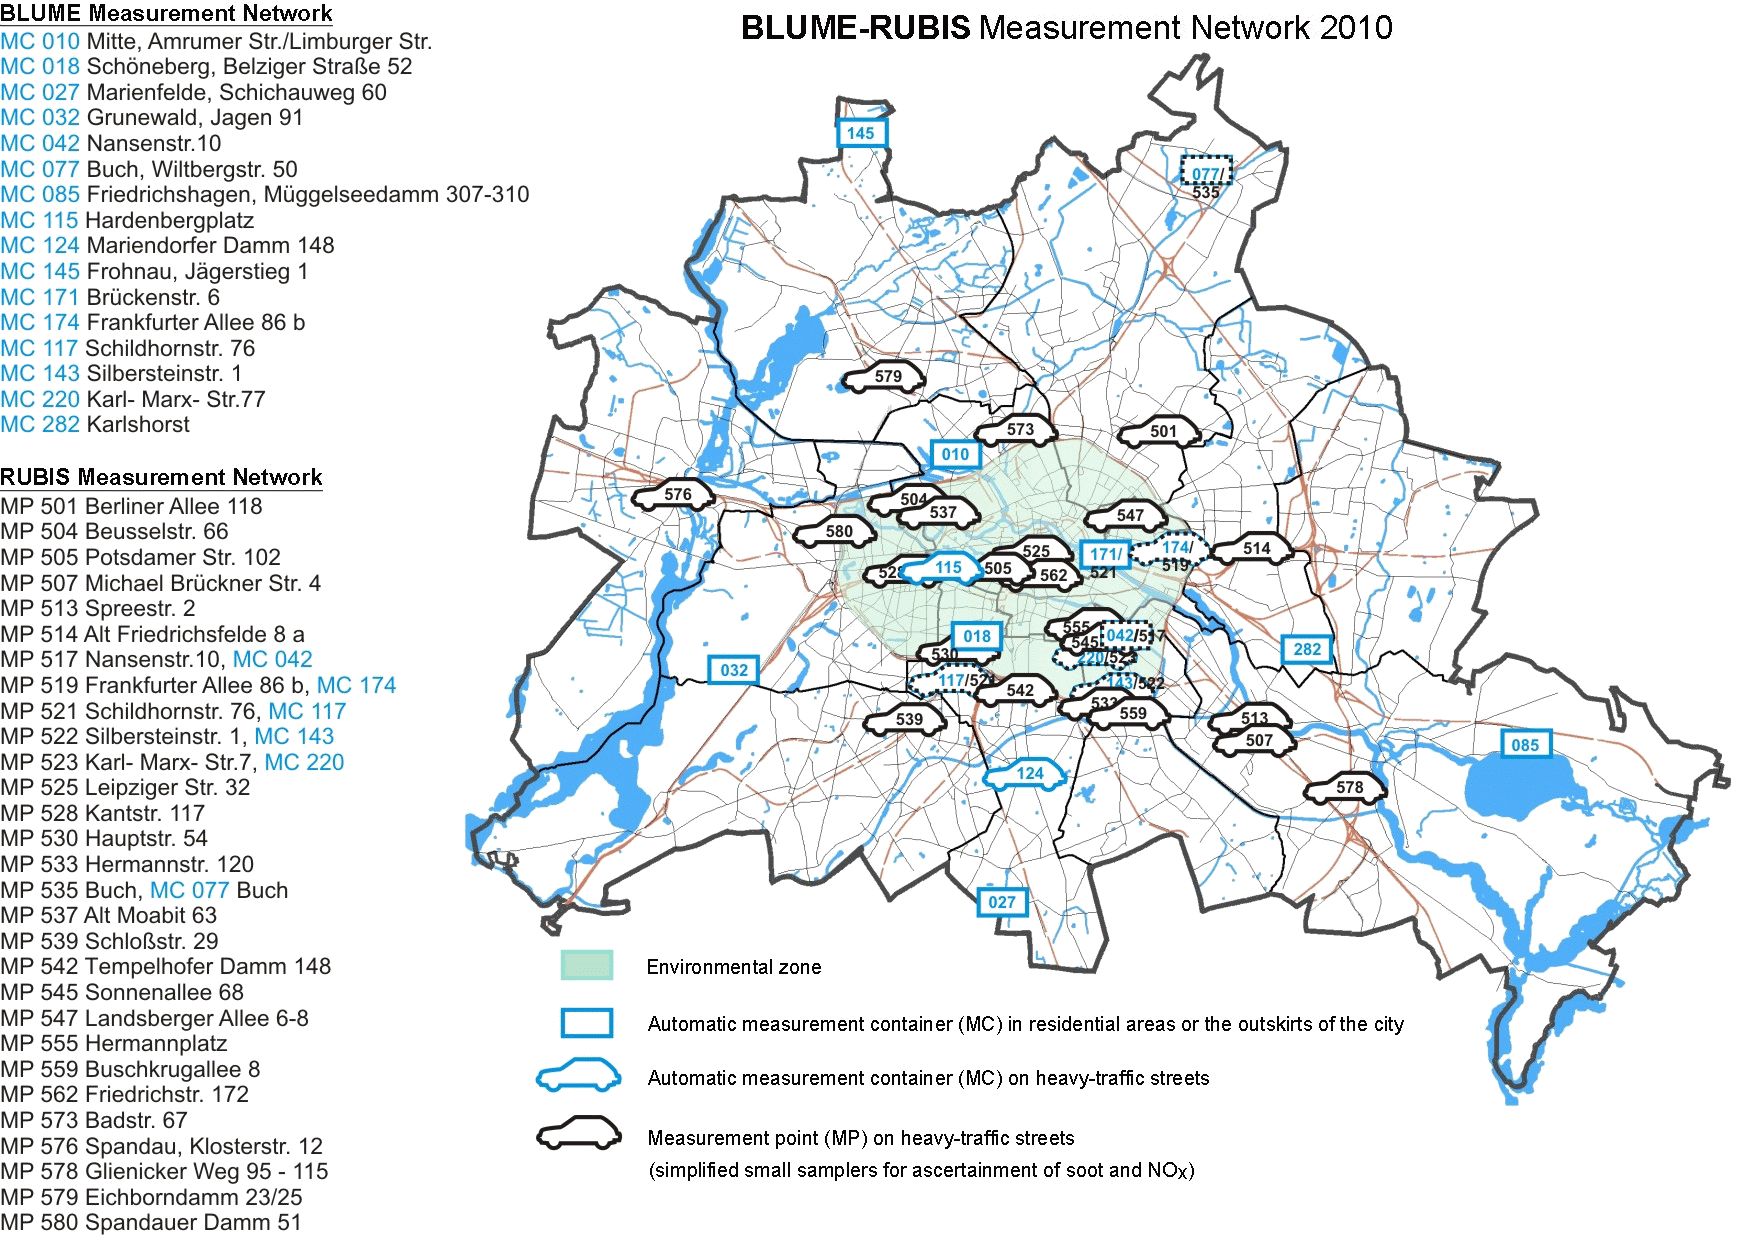 Enlarge photo: Fig. 5: Locations of the automatic container measurement stations of the Berlin Air Quality Measurement Network (BLUME), and the RUBIS measurement points, 2010.